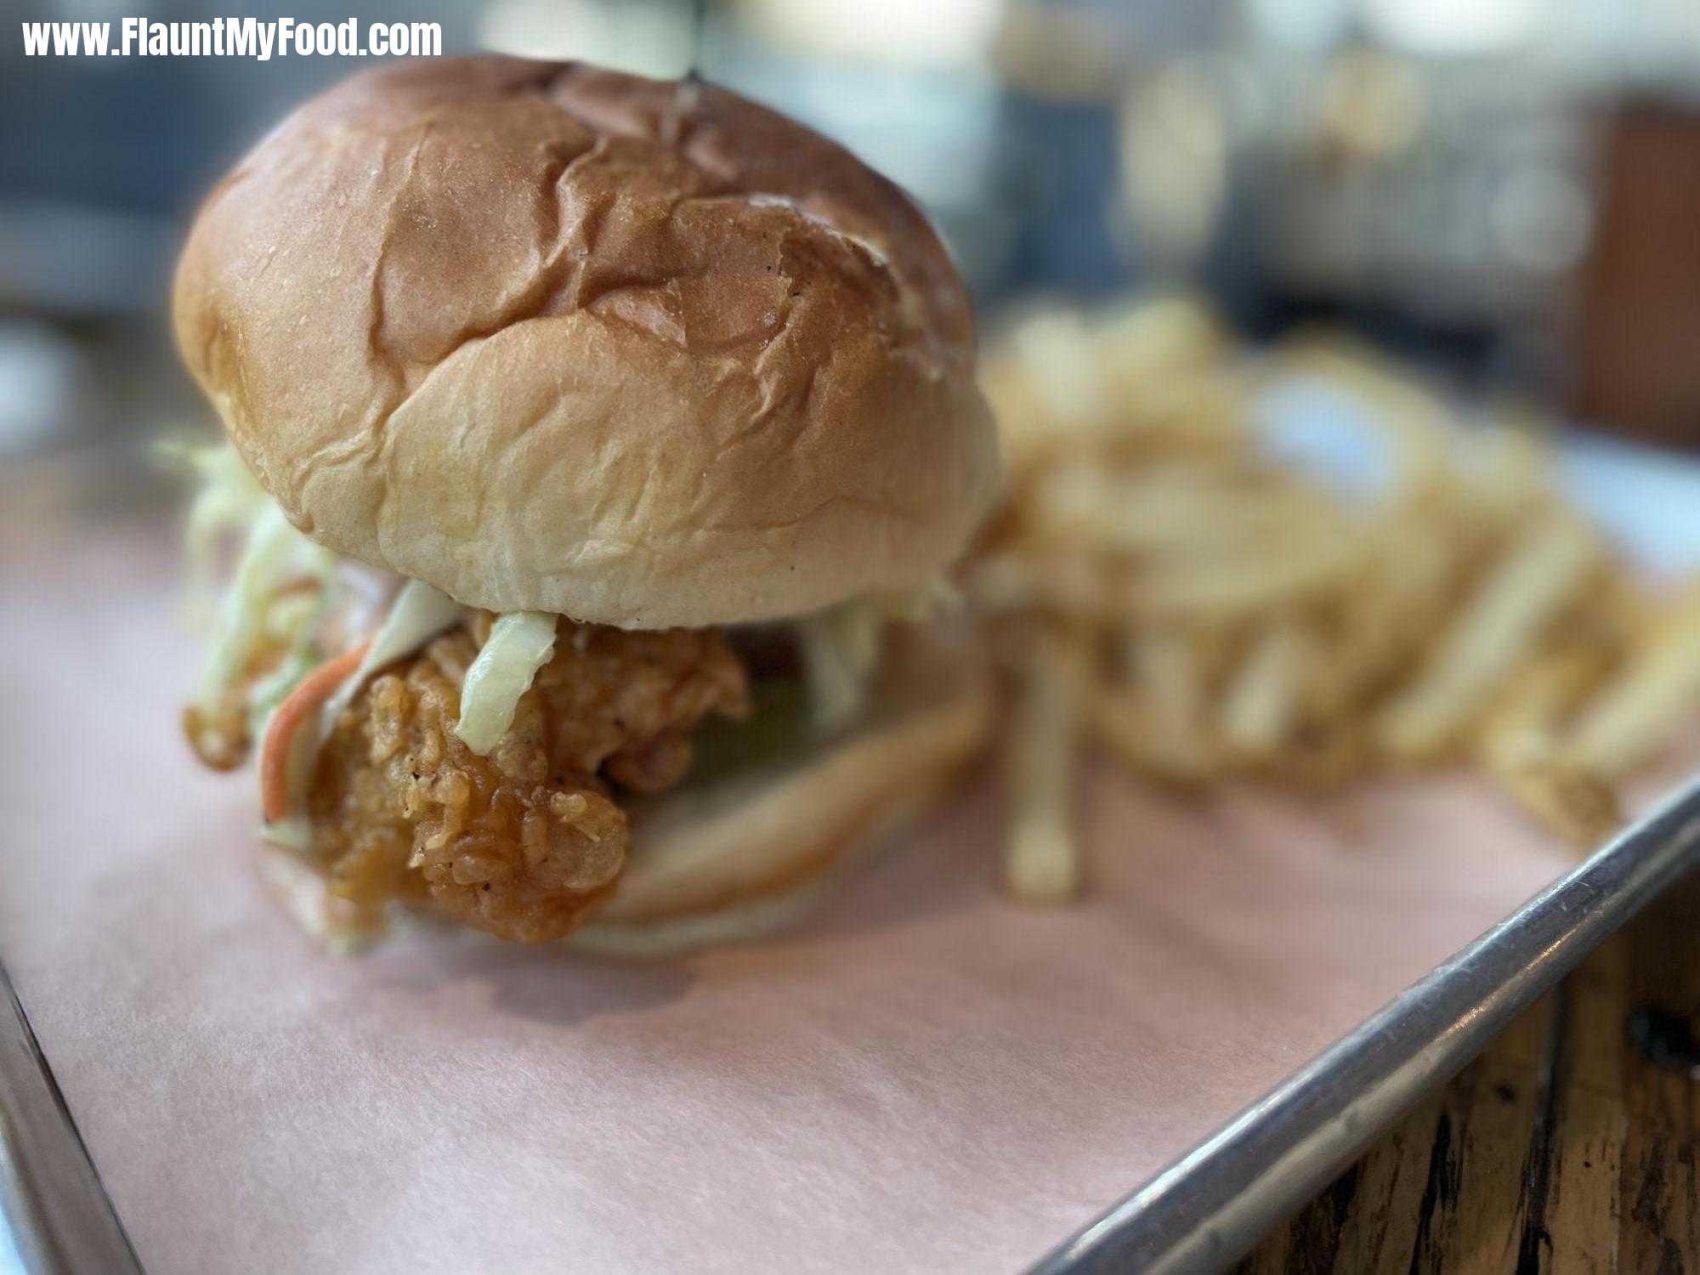 The Cook Shack located South University in Fort Worth Texas chicken hamburger with fries